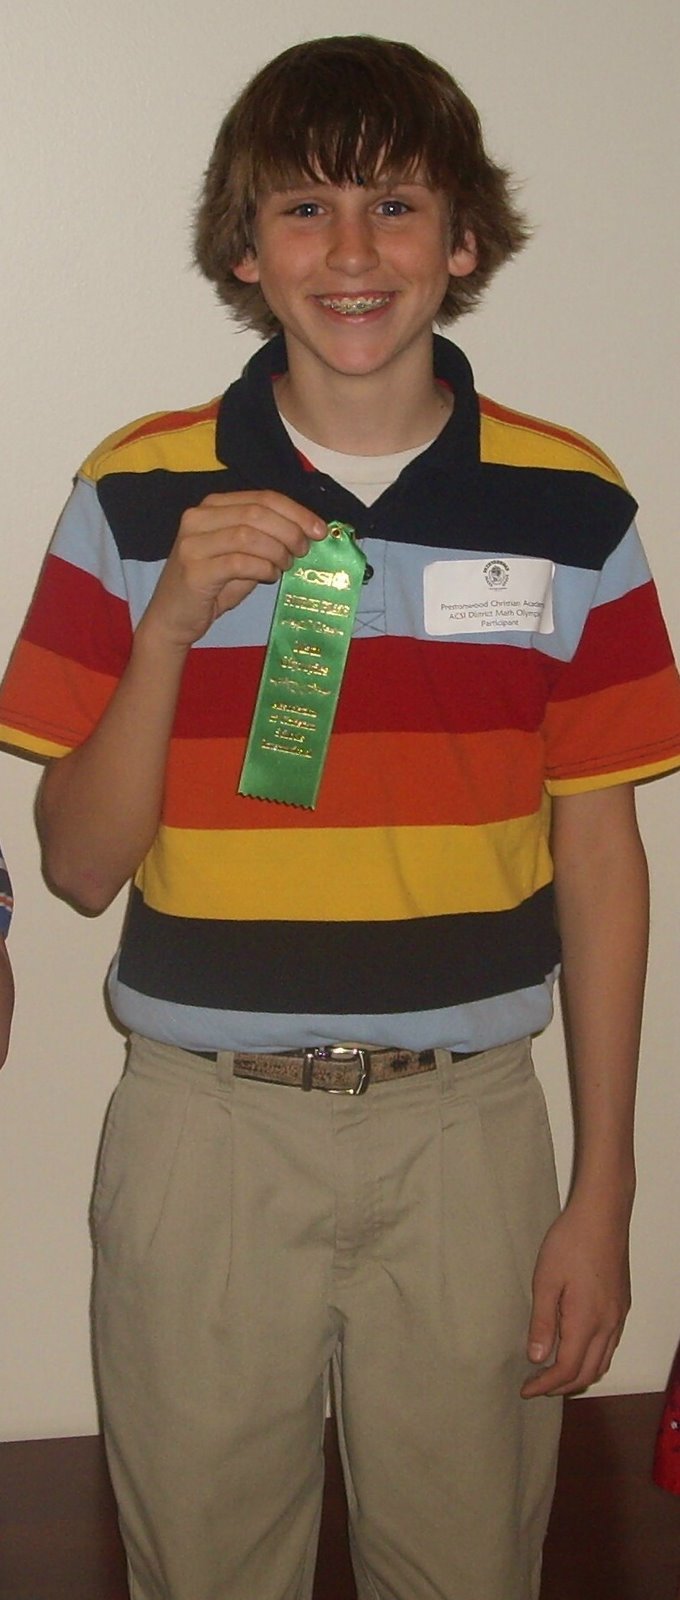 [Nathan+4th+place+in+Math+Olympics.jpg]